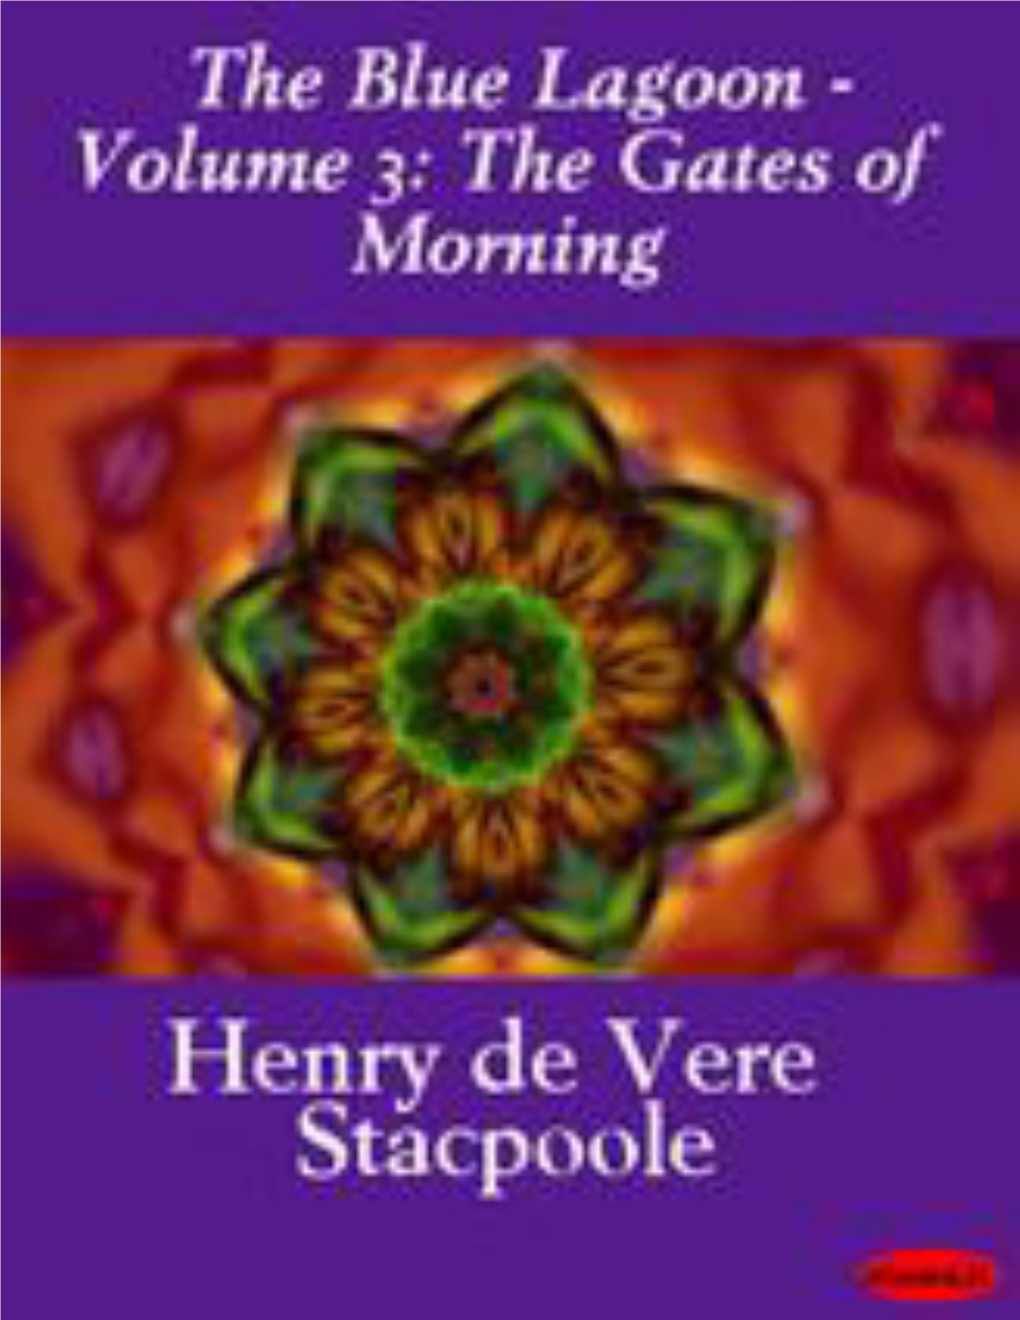 The Gates of Morning - Volume 3 of the Blue Lagoon Trilogy by Henry De Vere Stacpoole Foreward - a Plea for the Islands